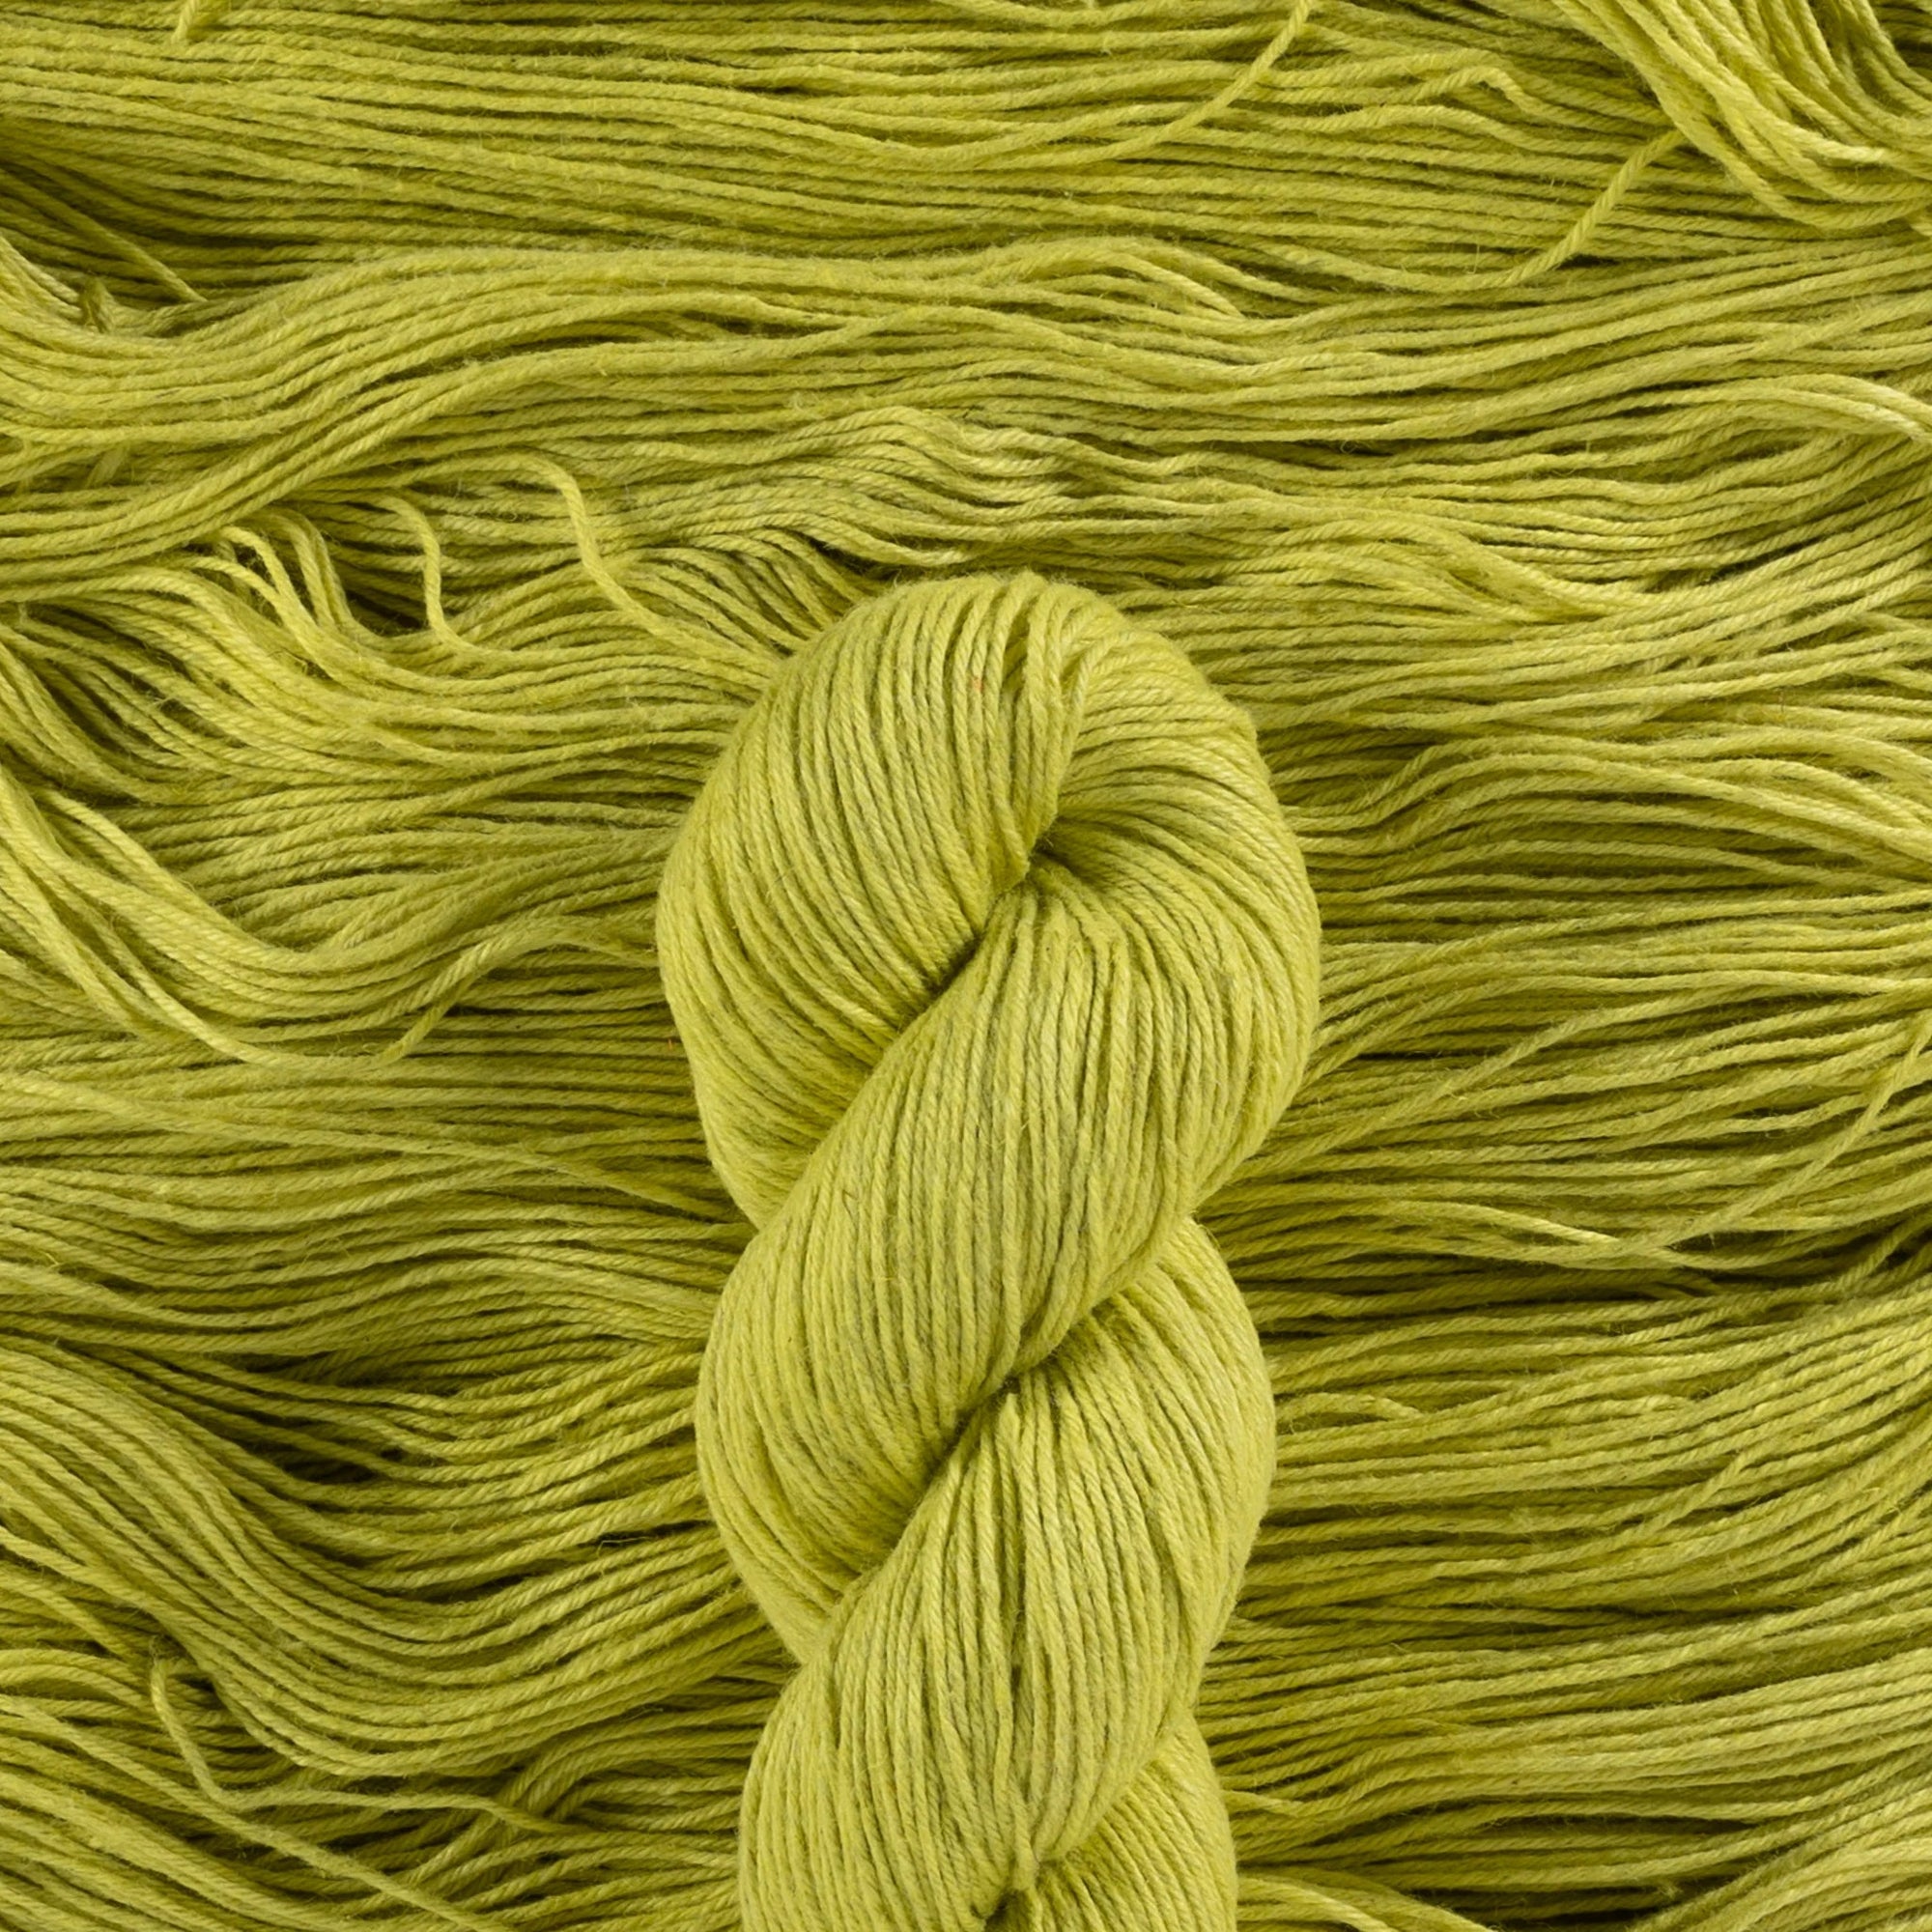 Ritual Dyes Undine DK - Ritual Dyes - New Growth - The Little Yarn Store